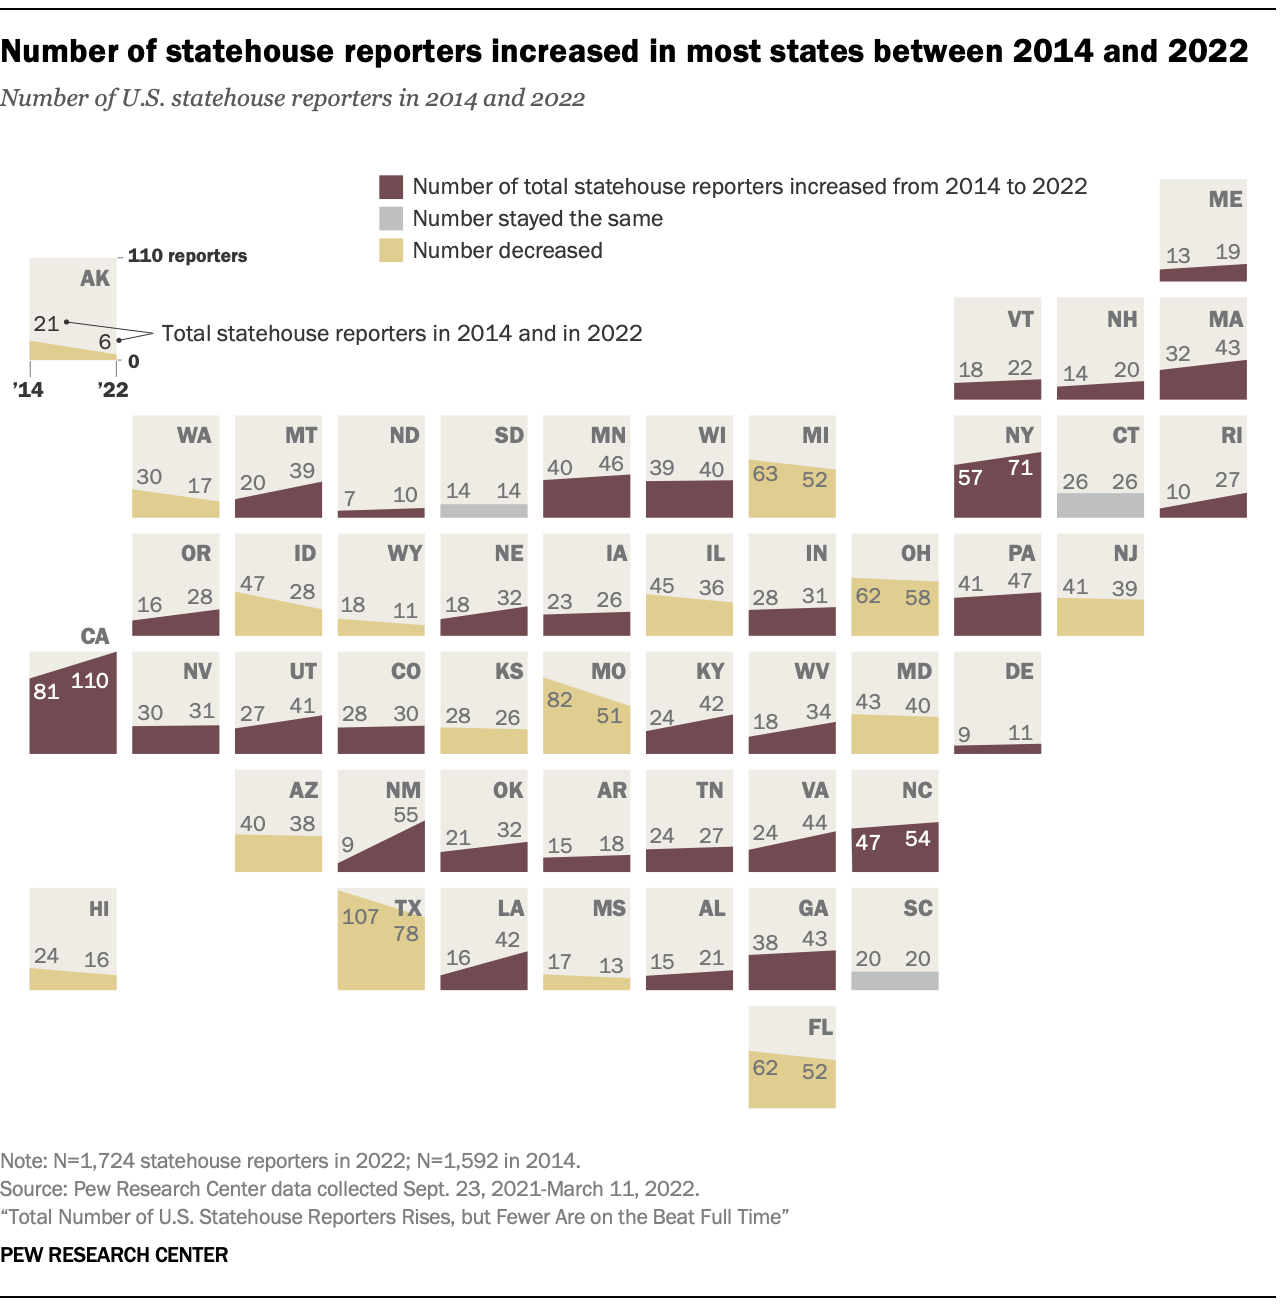 Number of statehouse reporters increased in most states between 2014 and 2022